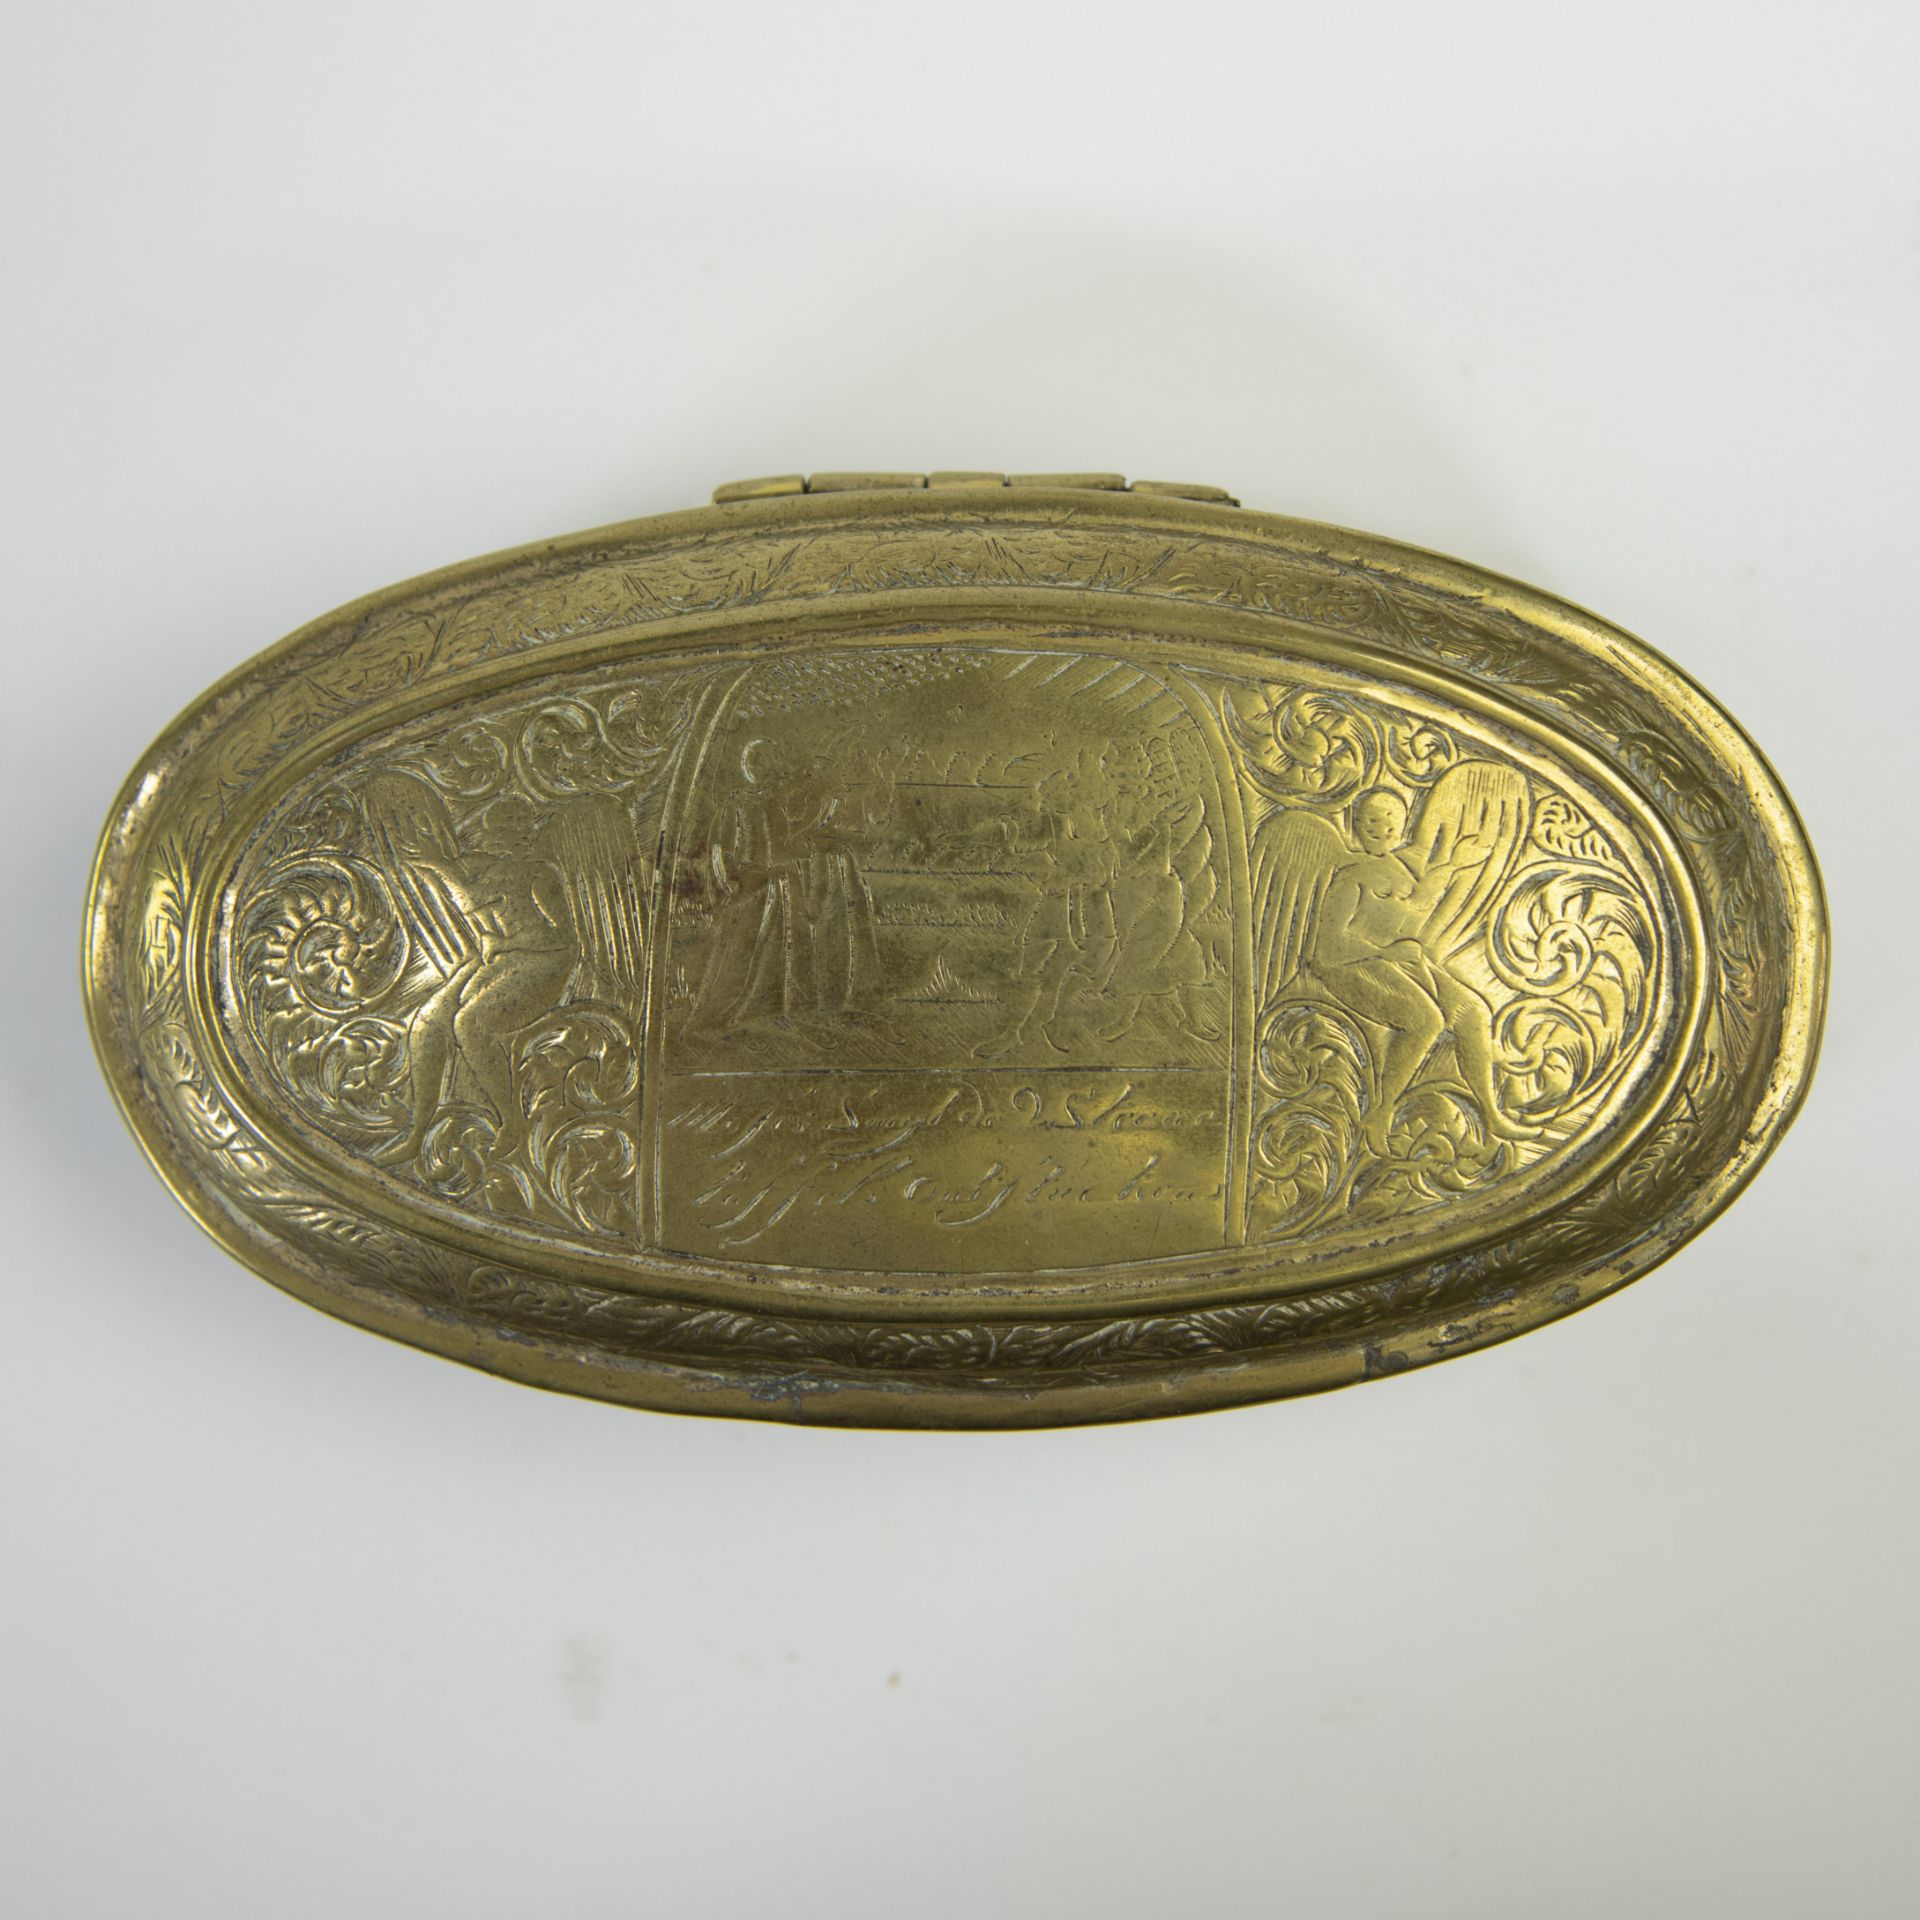 12 pewter plates and gilt tobacco box - Image 4 of 5